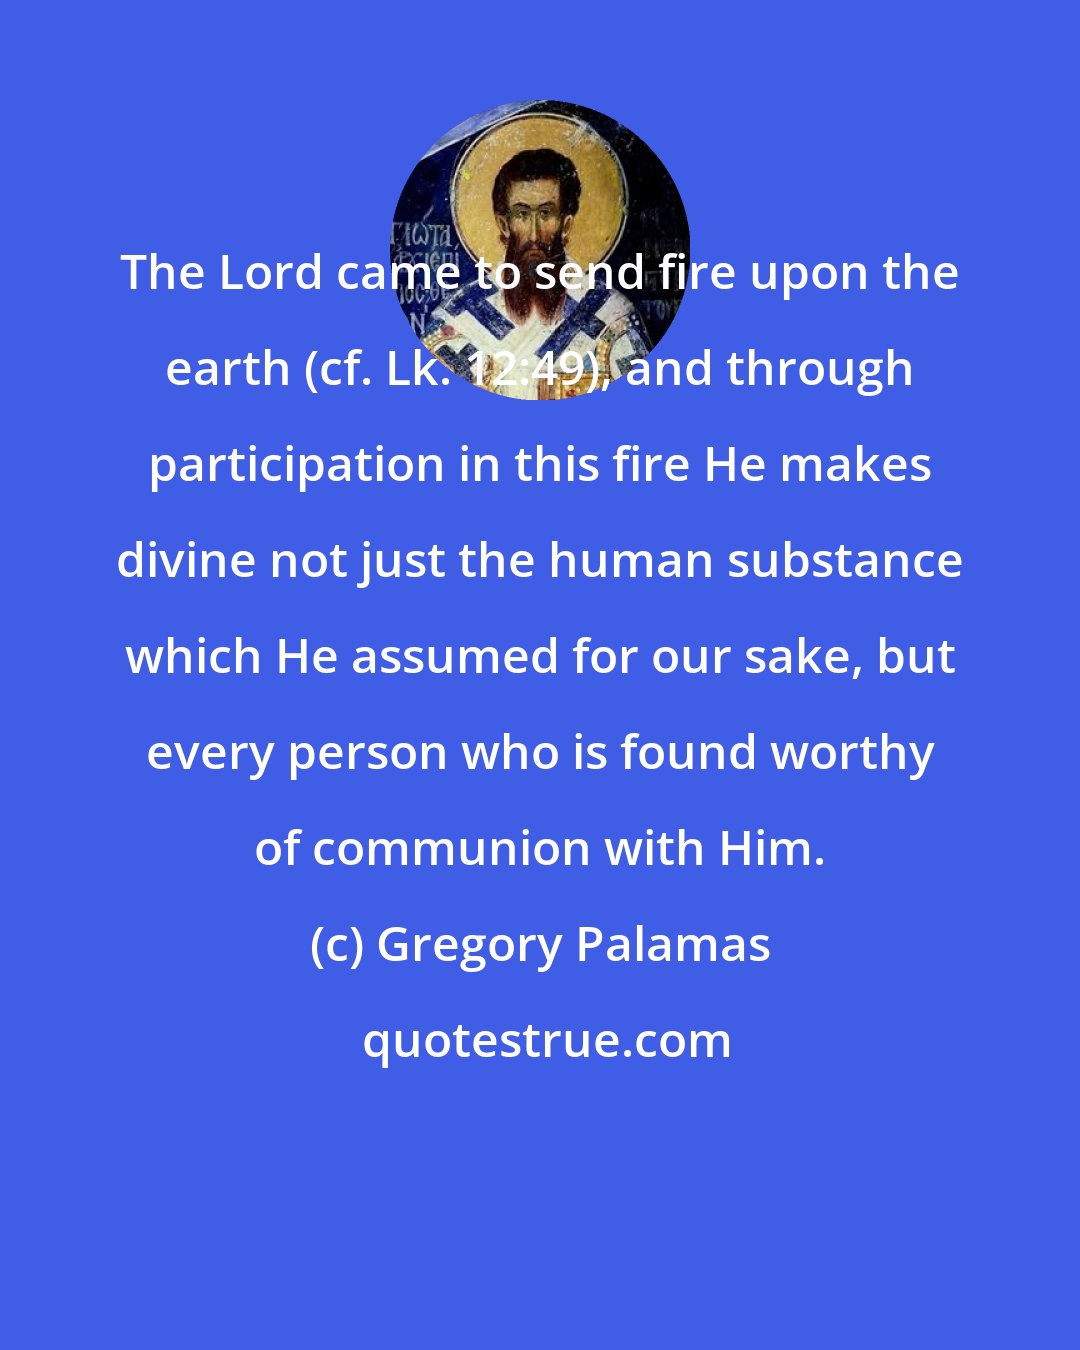 Gregory Palamas: The Lord came to send fire upon the earth (cf. Lk. 12:49), and through participation in this fire He makes divine not just the human substance which He assumed for our sake, but every person who is found worthy of communion with Him.